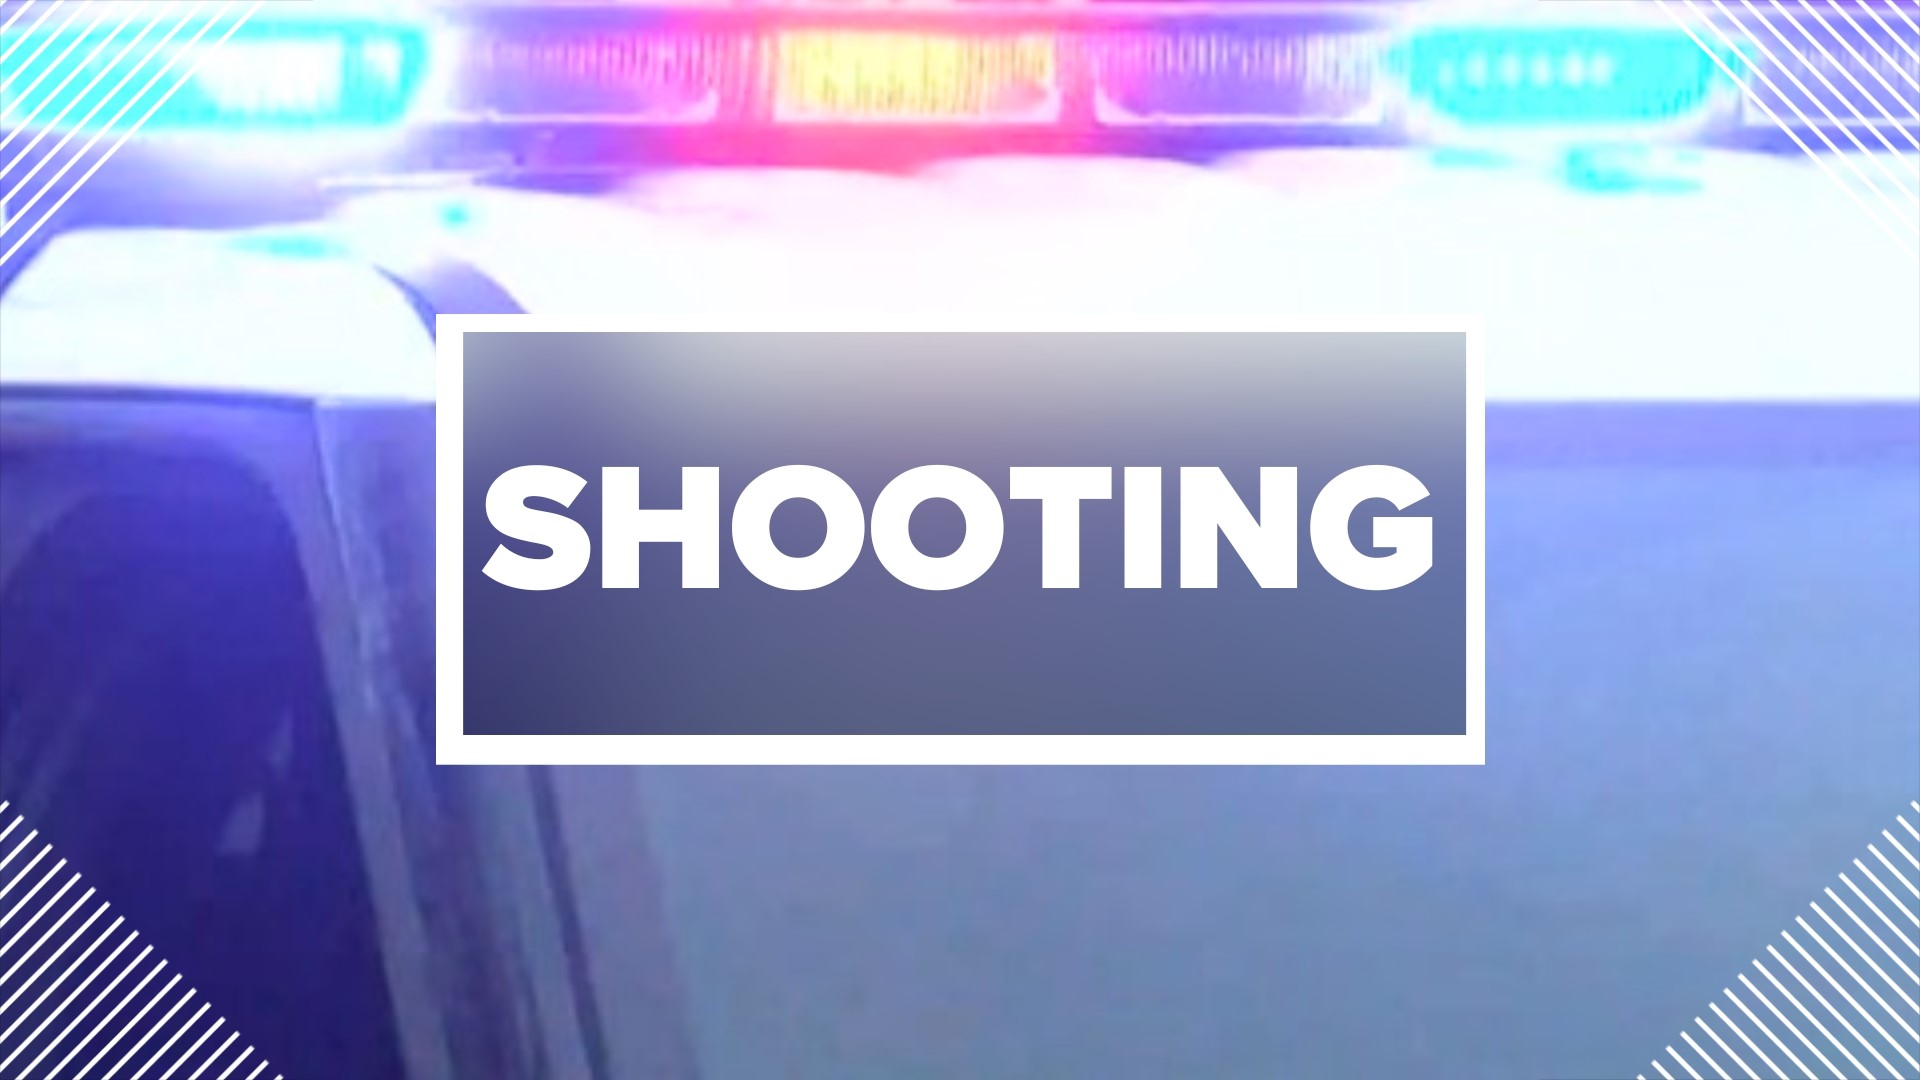 One person was sent to the hospital Wednesday evening after a shooting in Burlington, according to police.